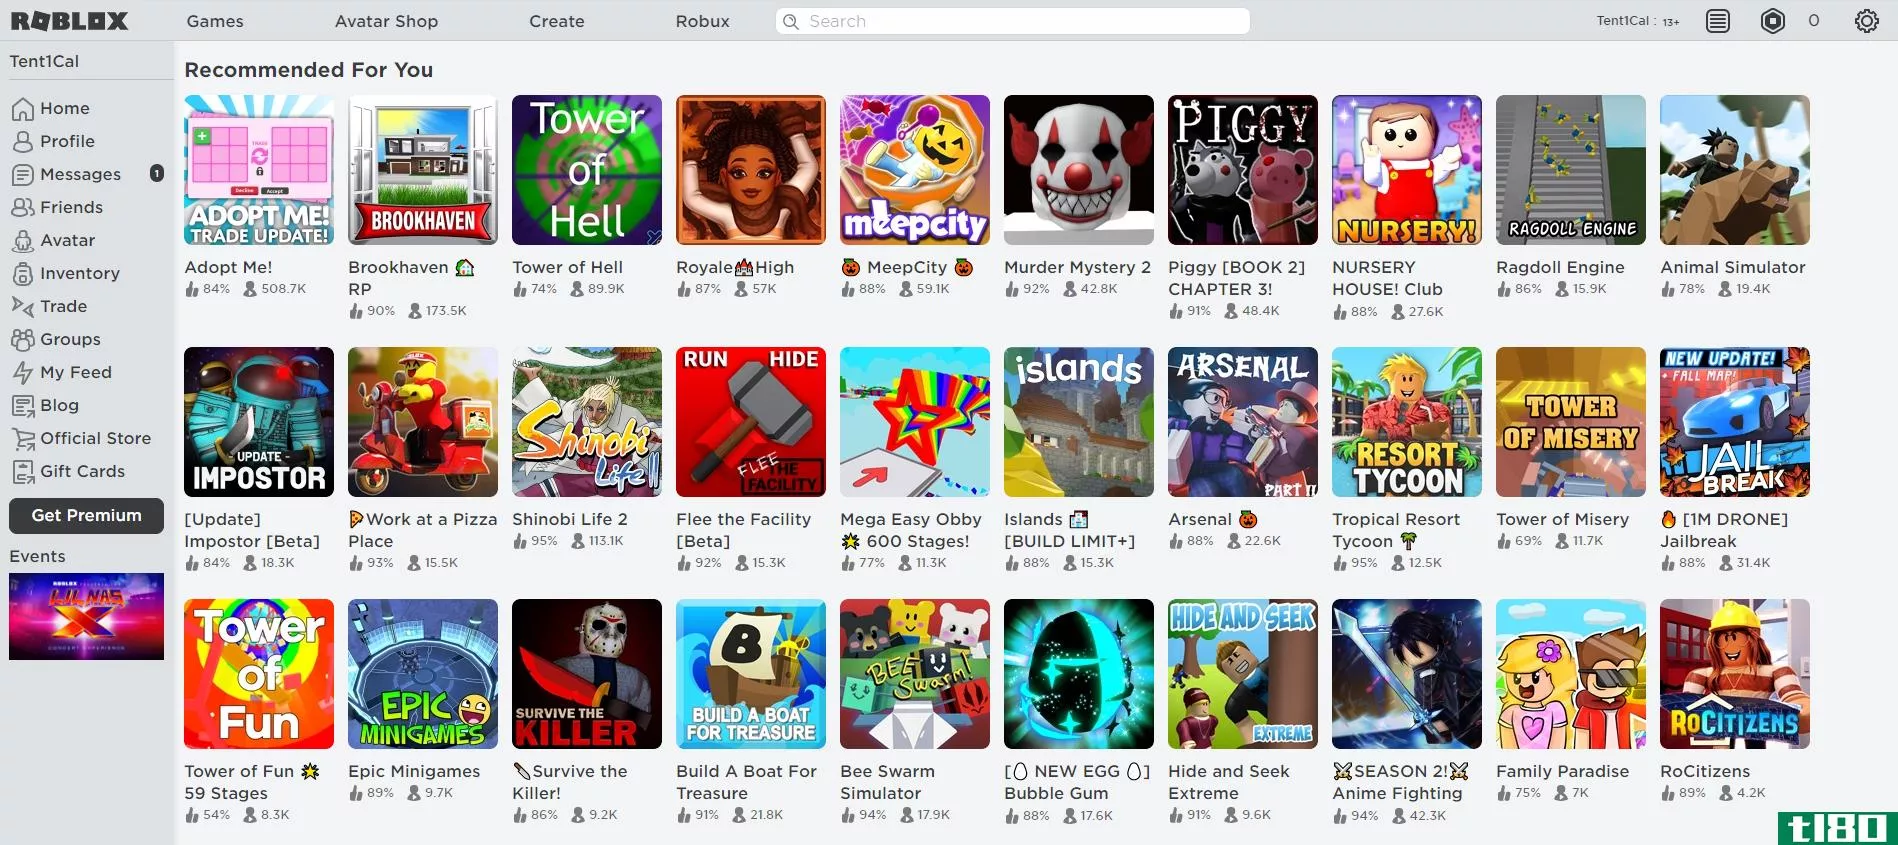 roblox recommended for you games screen